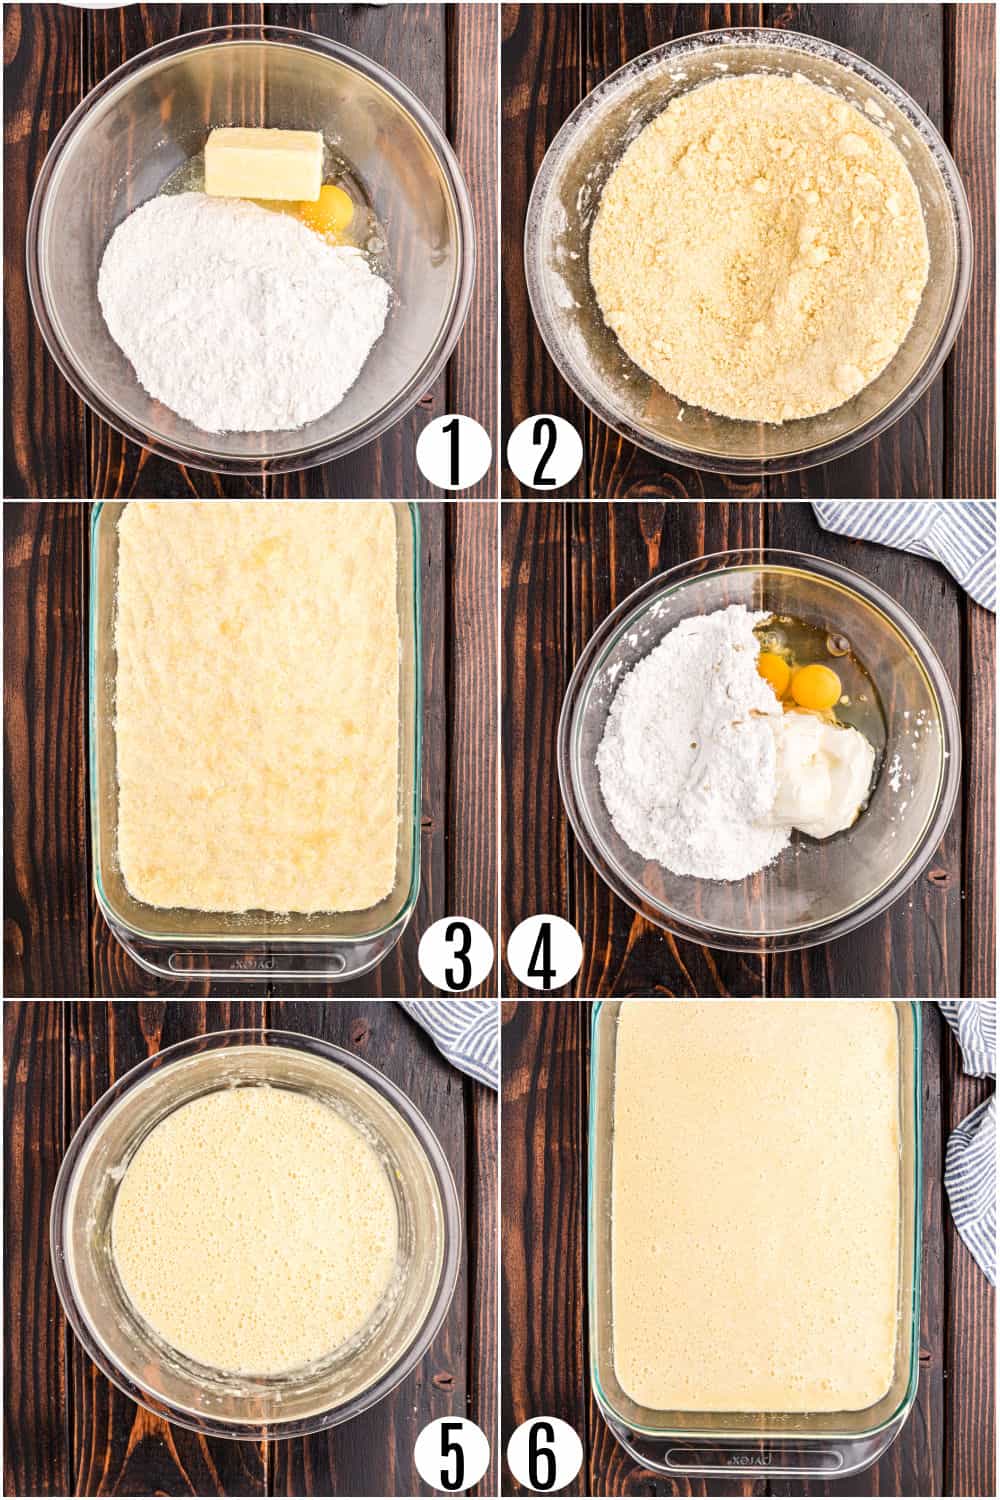 Step by step photos showing how to make gooey butter cake.